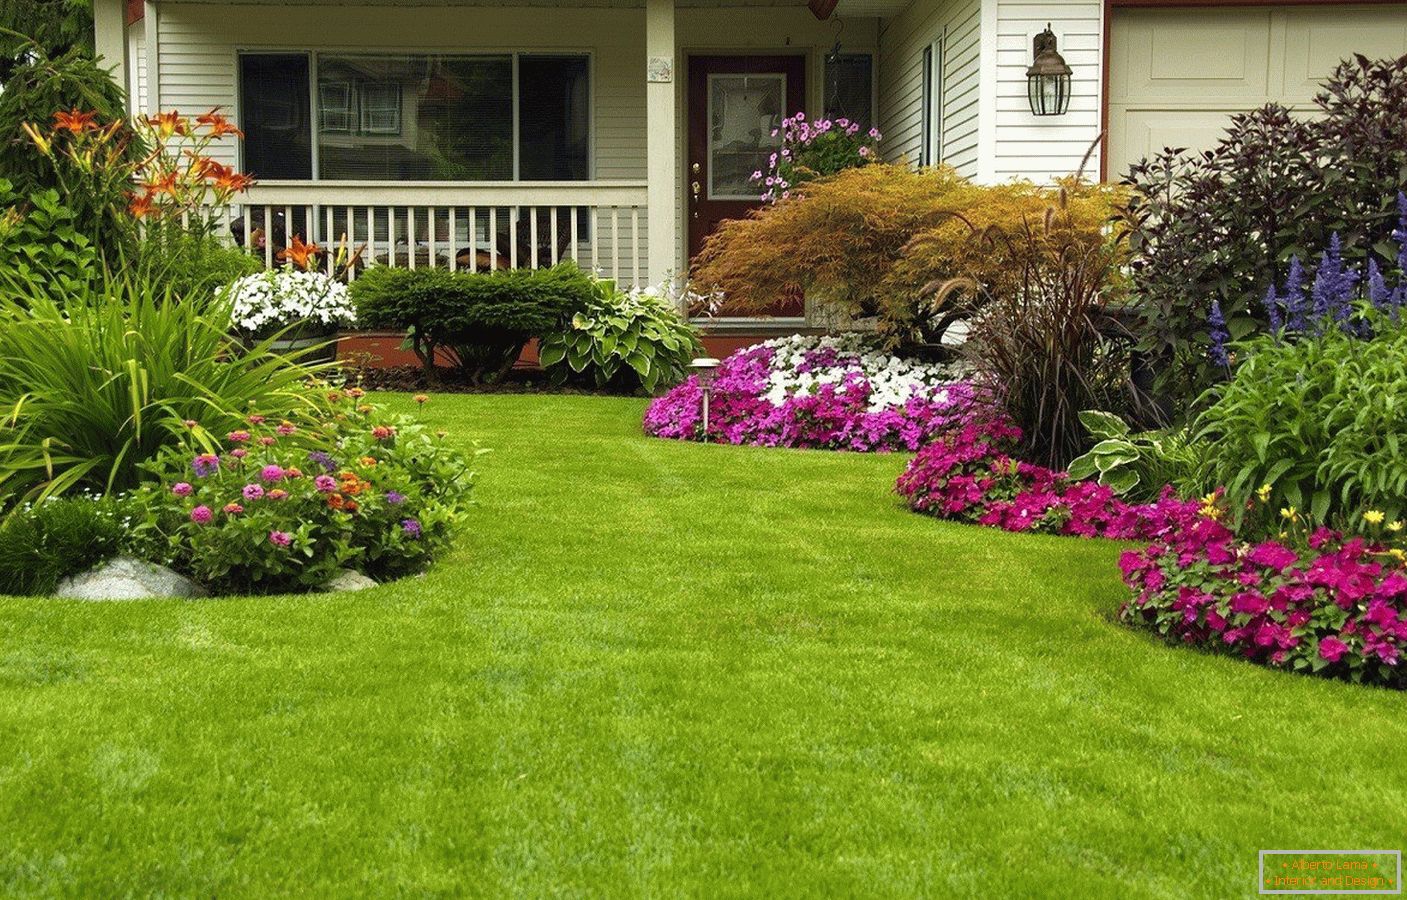 An excellent lawn will decorate any site